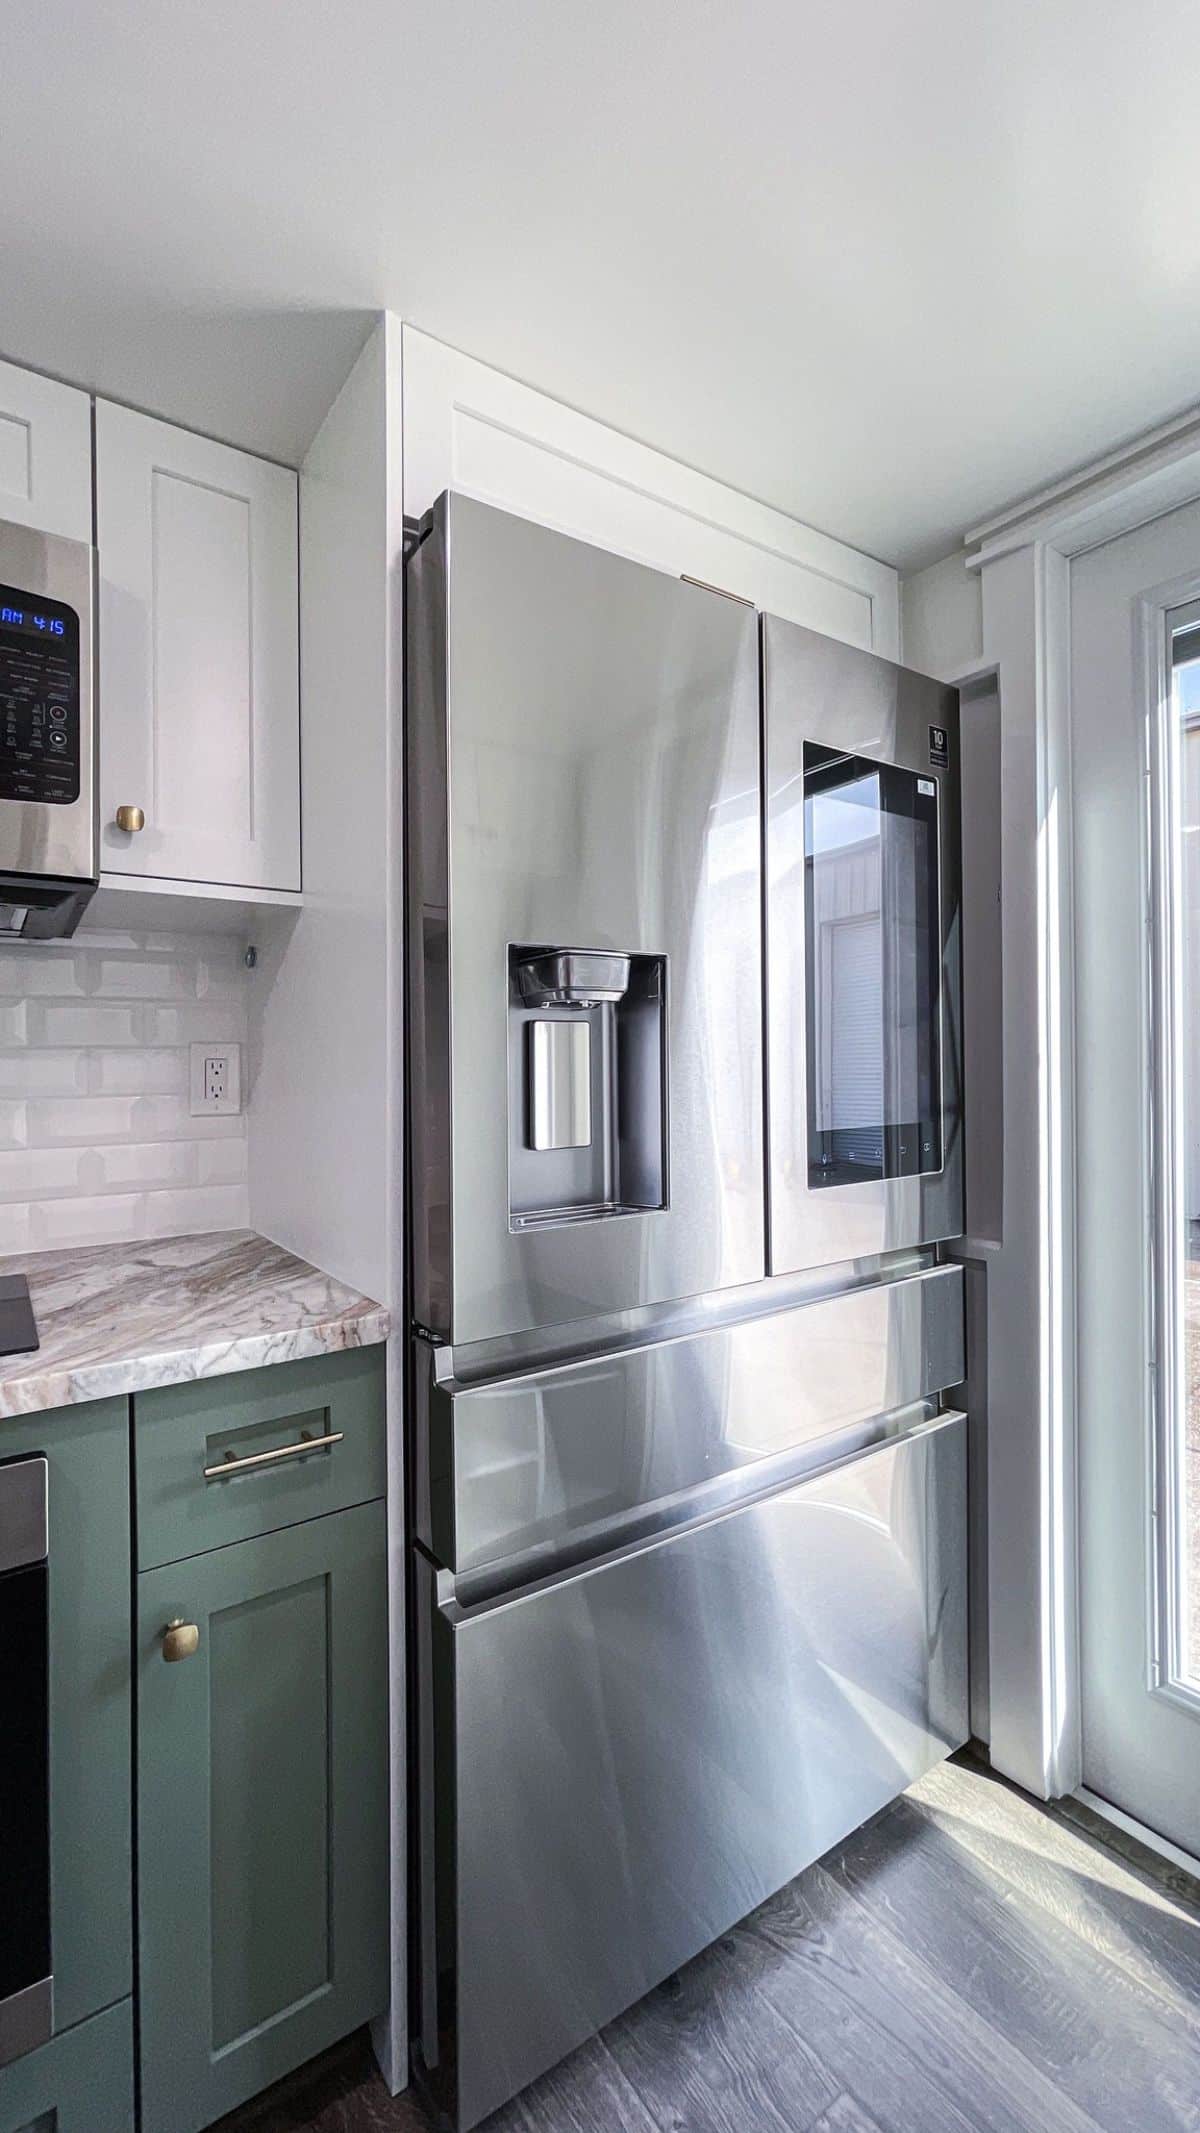 stainless steel refrigerator next to green cabinet